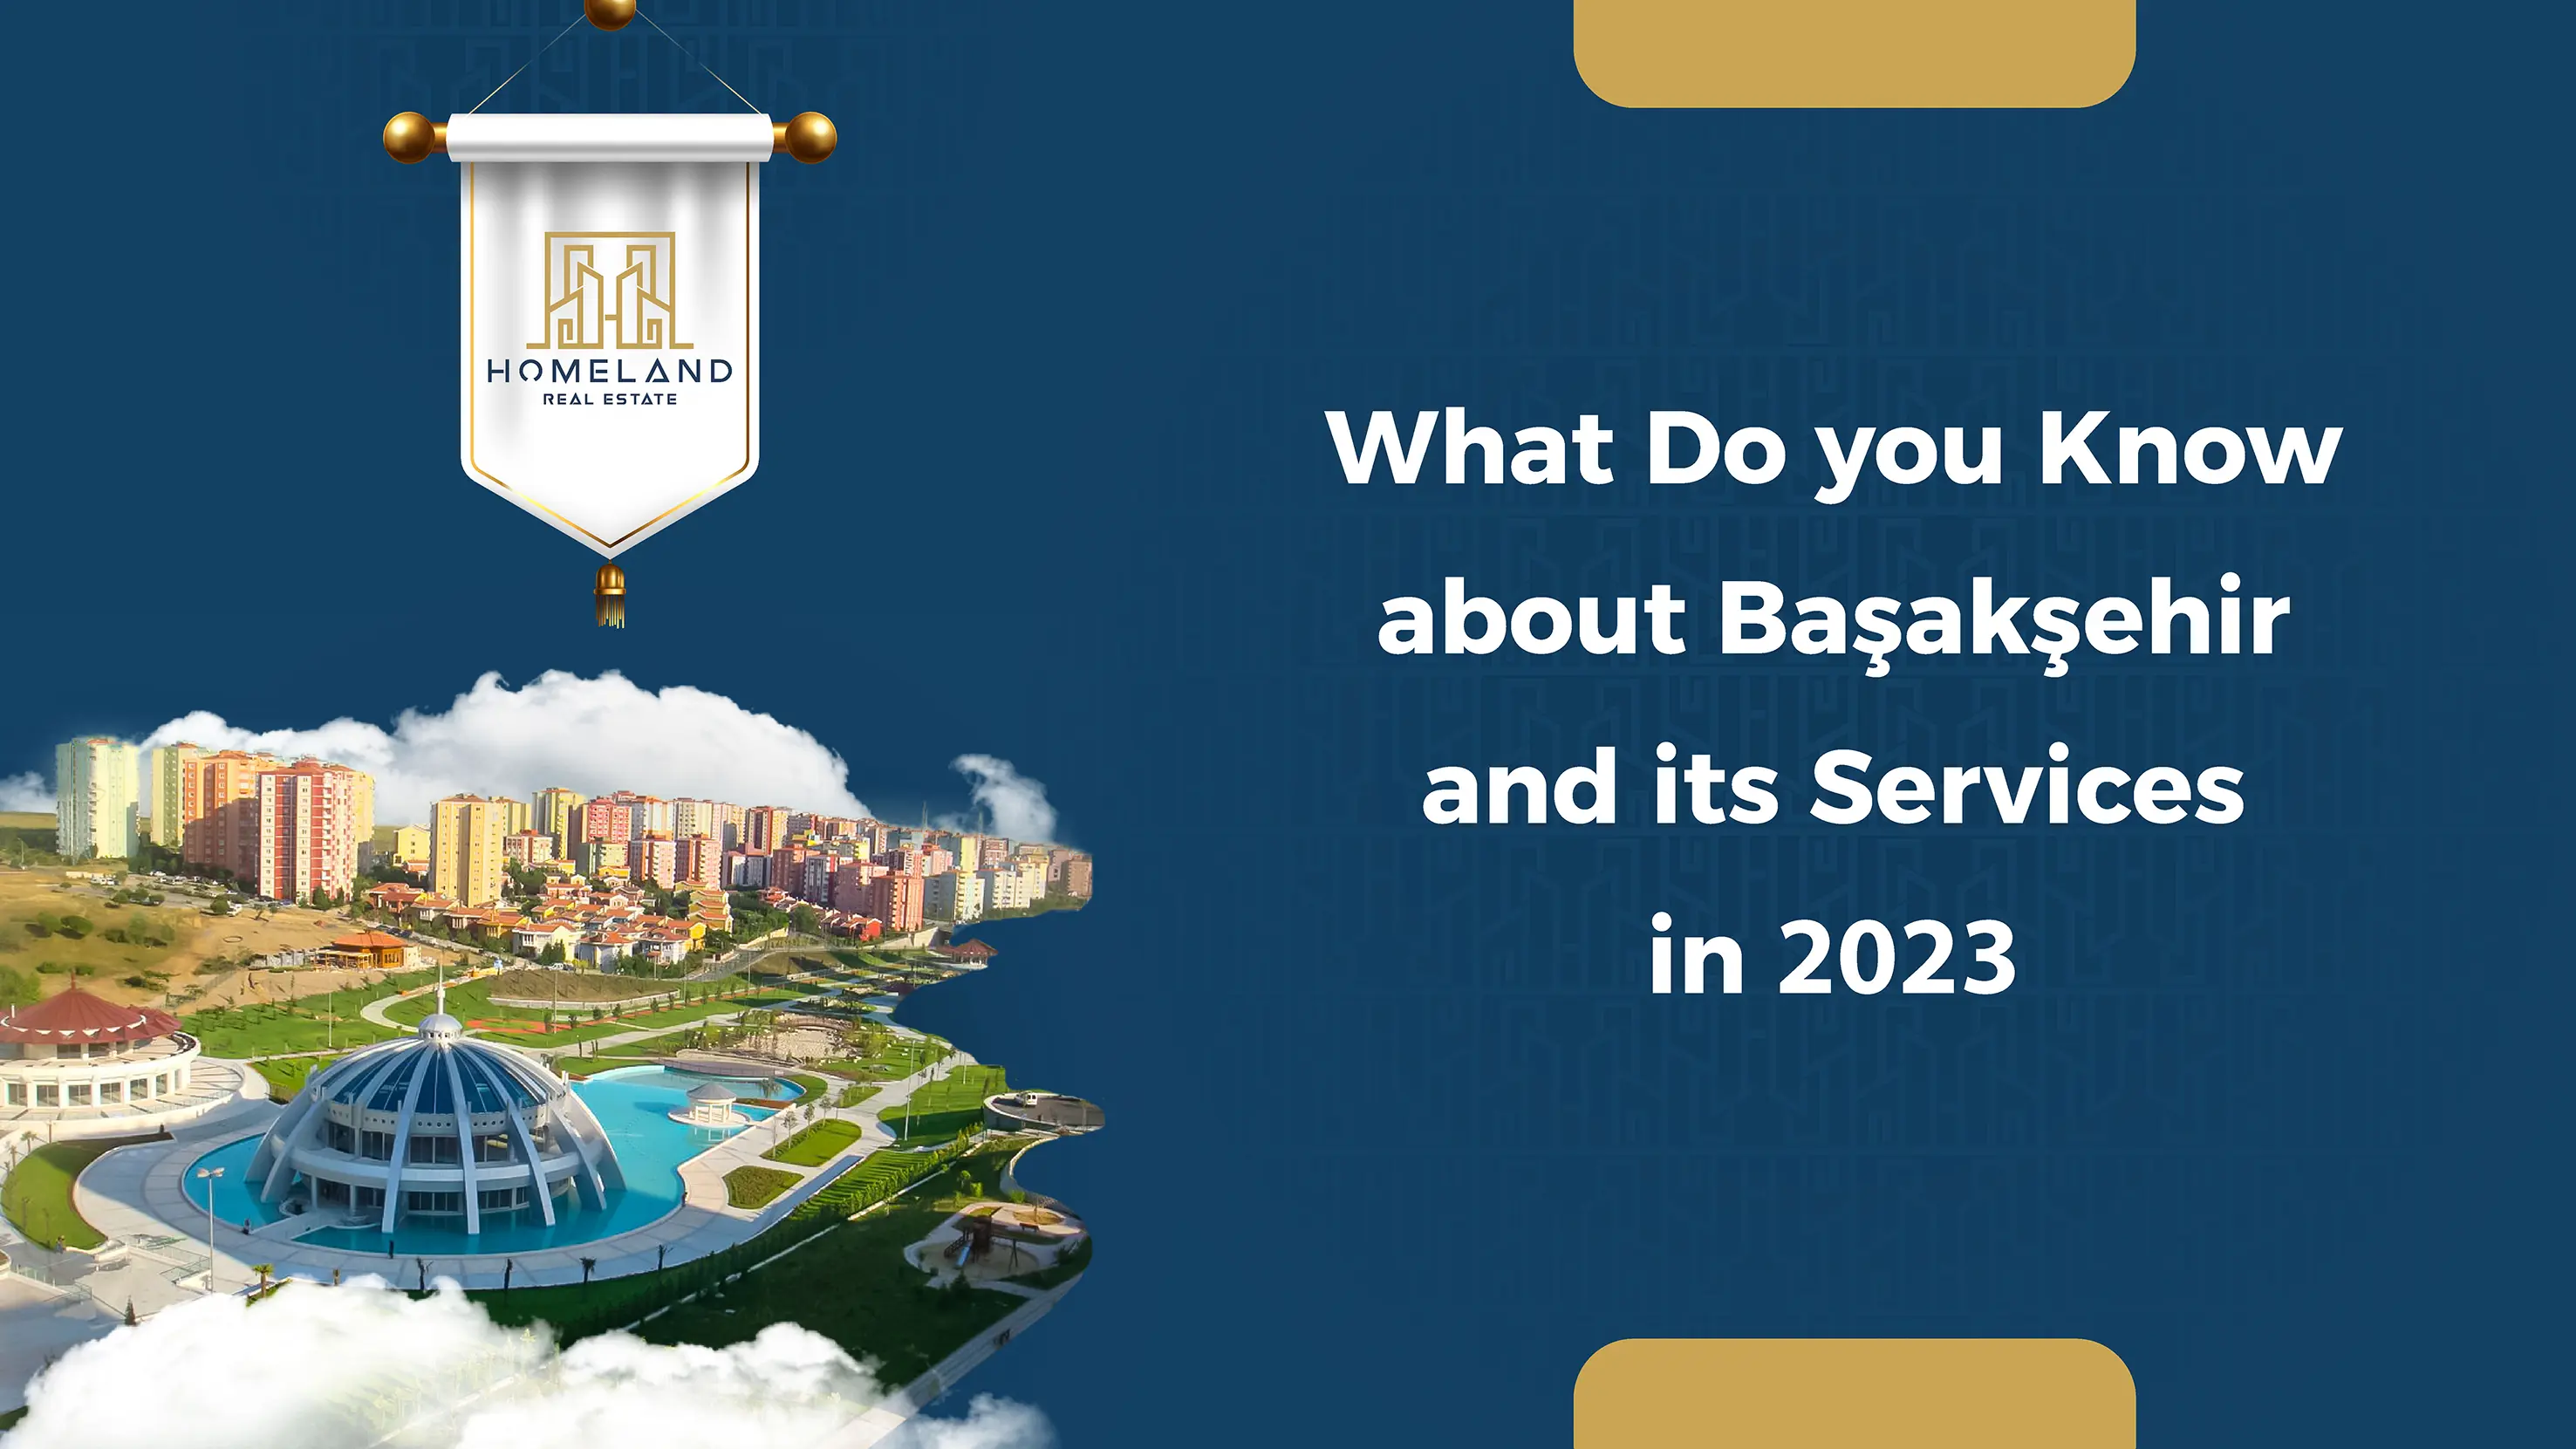 What Do You Know About Başakşehir And Its Services (2023)?